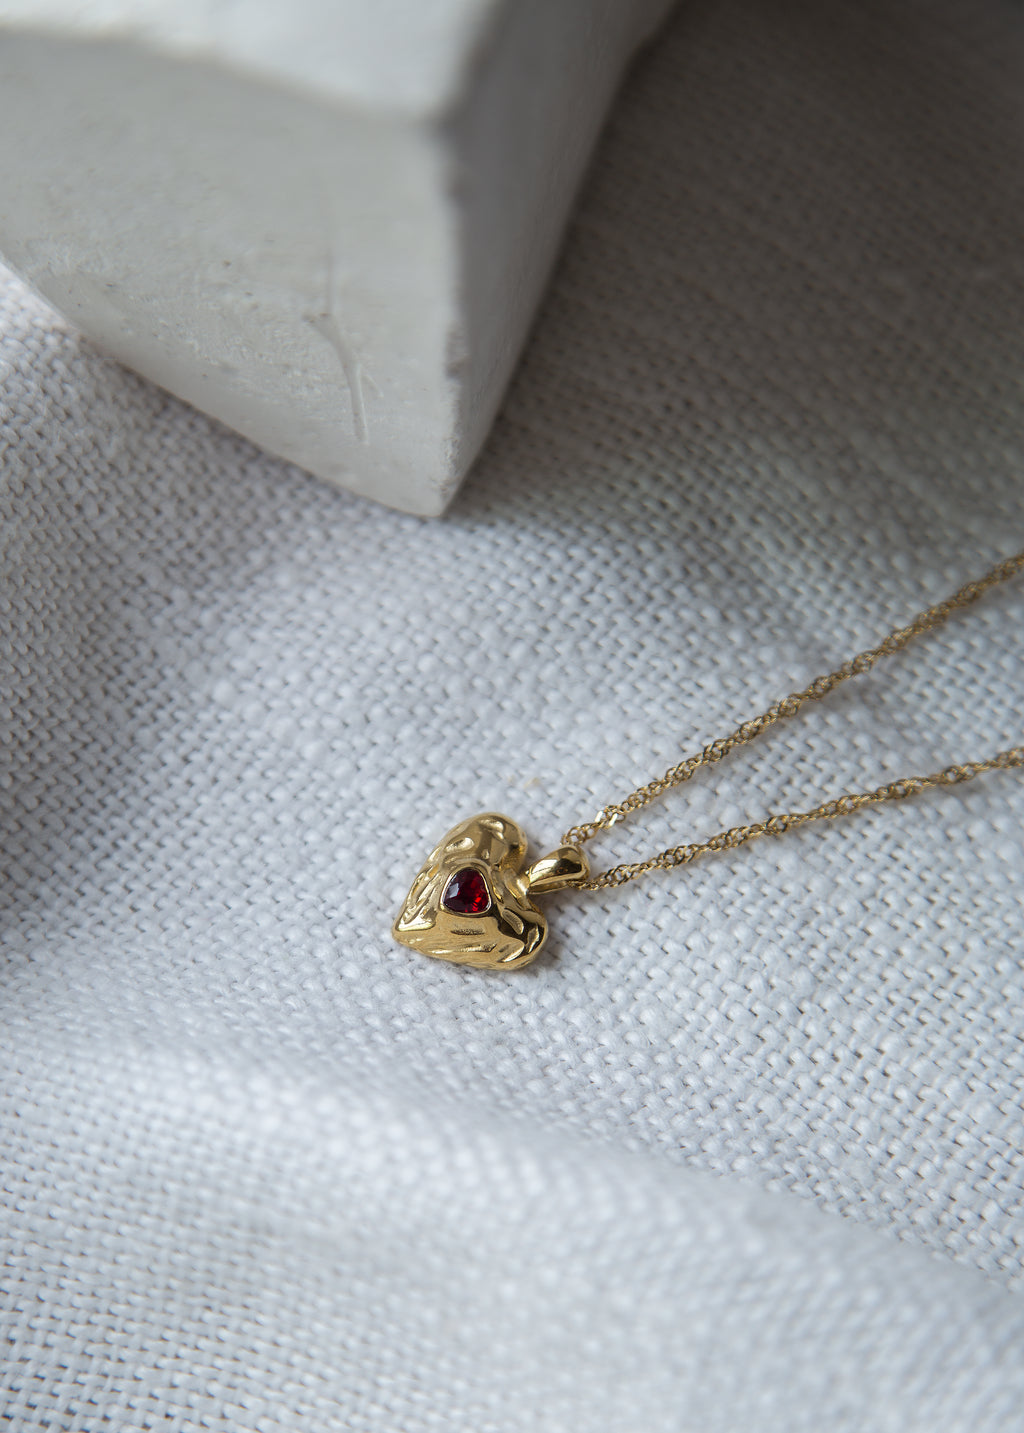 This stunning pendant, adorned with a red cubic zircon at its center, boasts a hammered texture that catches the light. The heart shape embodies love and emotion, making it a meaningful addition to your collection. Elevate your style with this exquisite statement piece